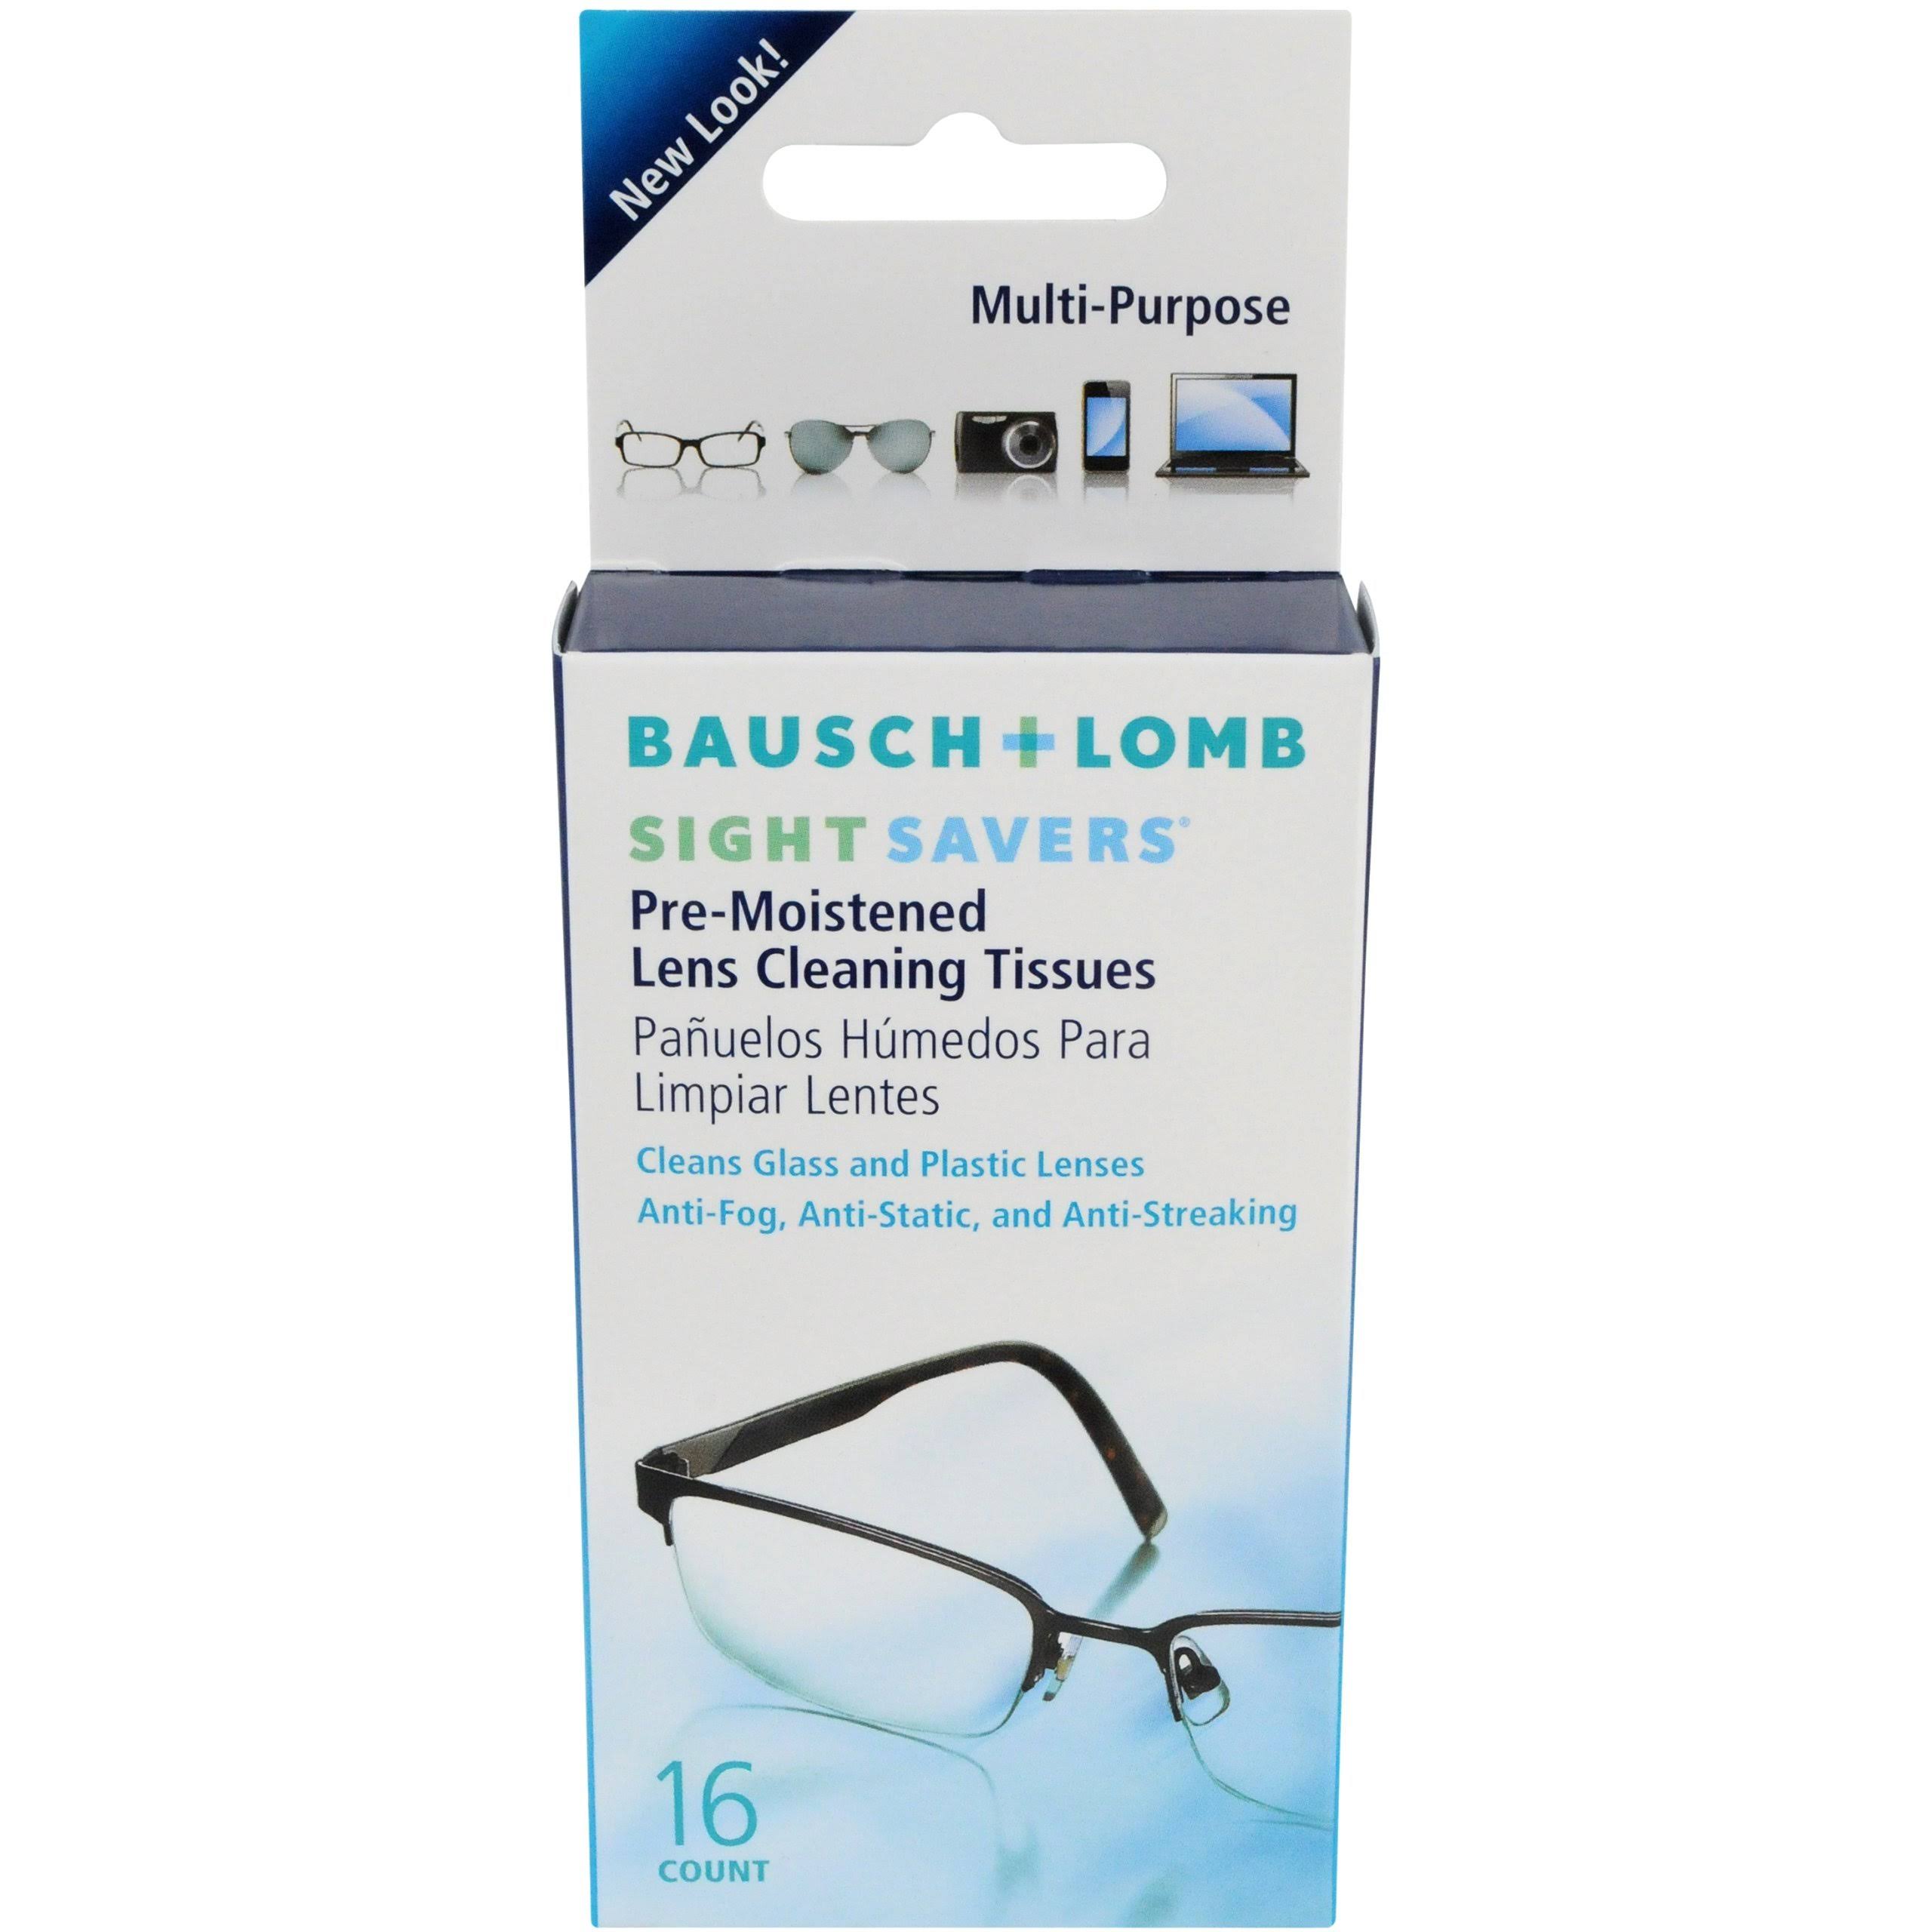 Bausch and Lomb Sight Savers Pre-moistened Lens Cleaning Tissues - 16ct